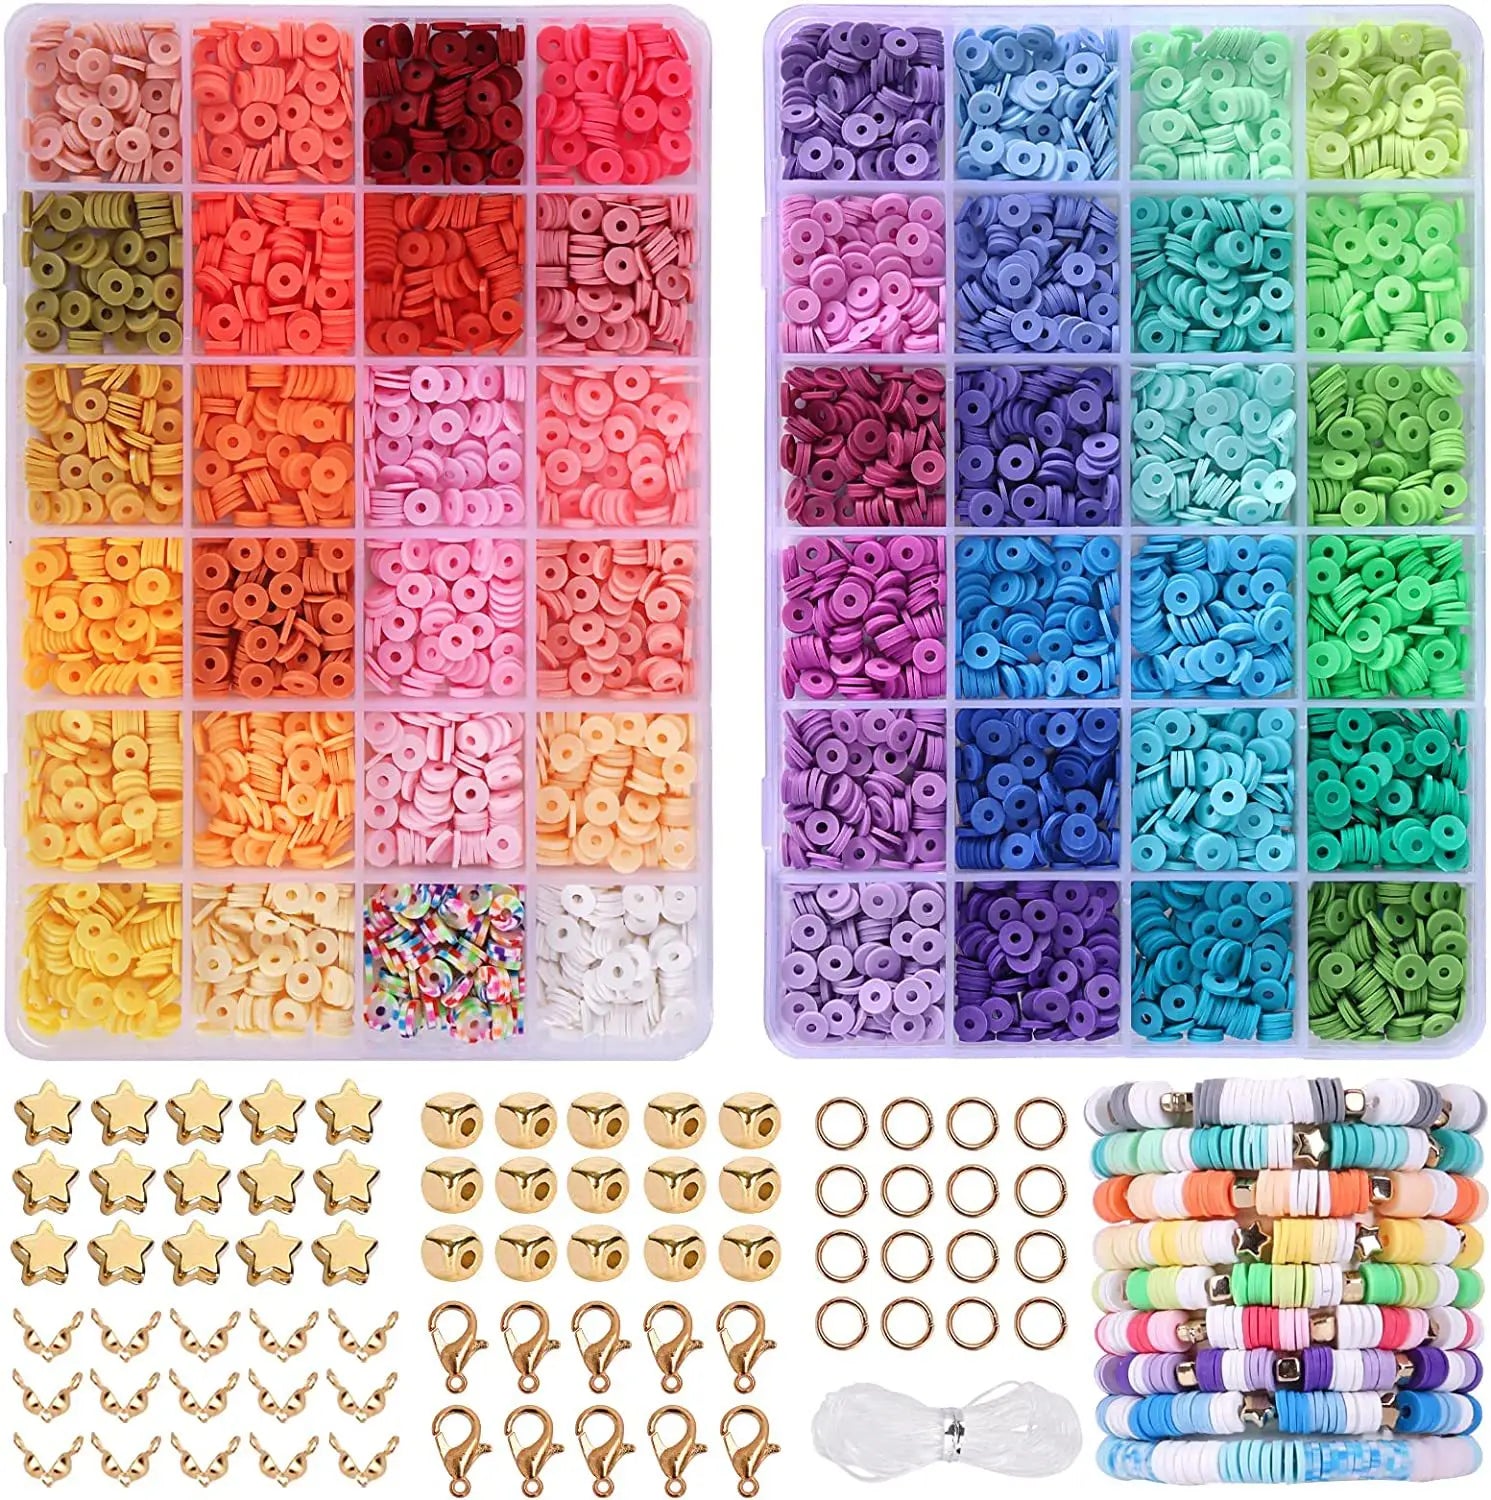 2 Box 24 Rainbow Color Clay Beads Bracelet Making Kit for Jewelry Making Letter Beads Accessories Kit DIY Handmade Supplies Kit 1-5400pcs - IHavePaws